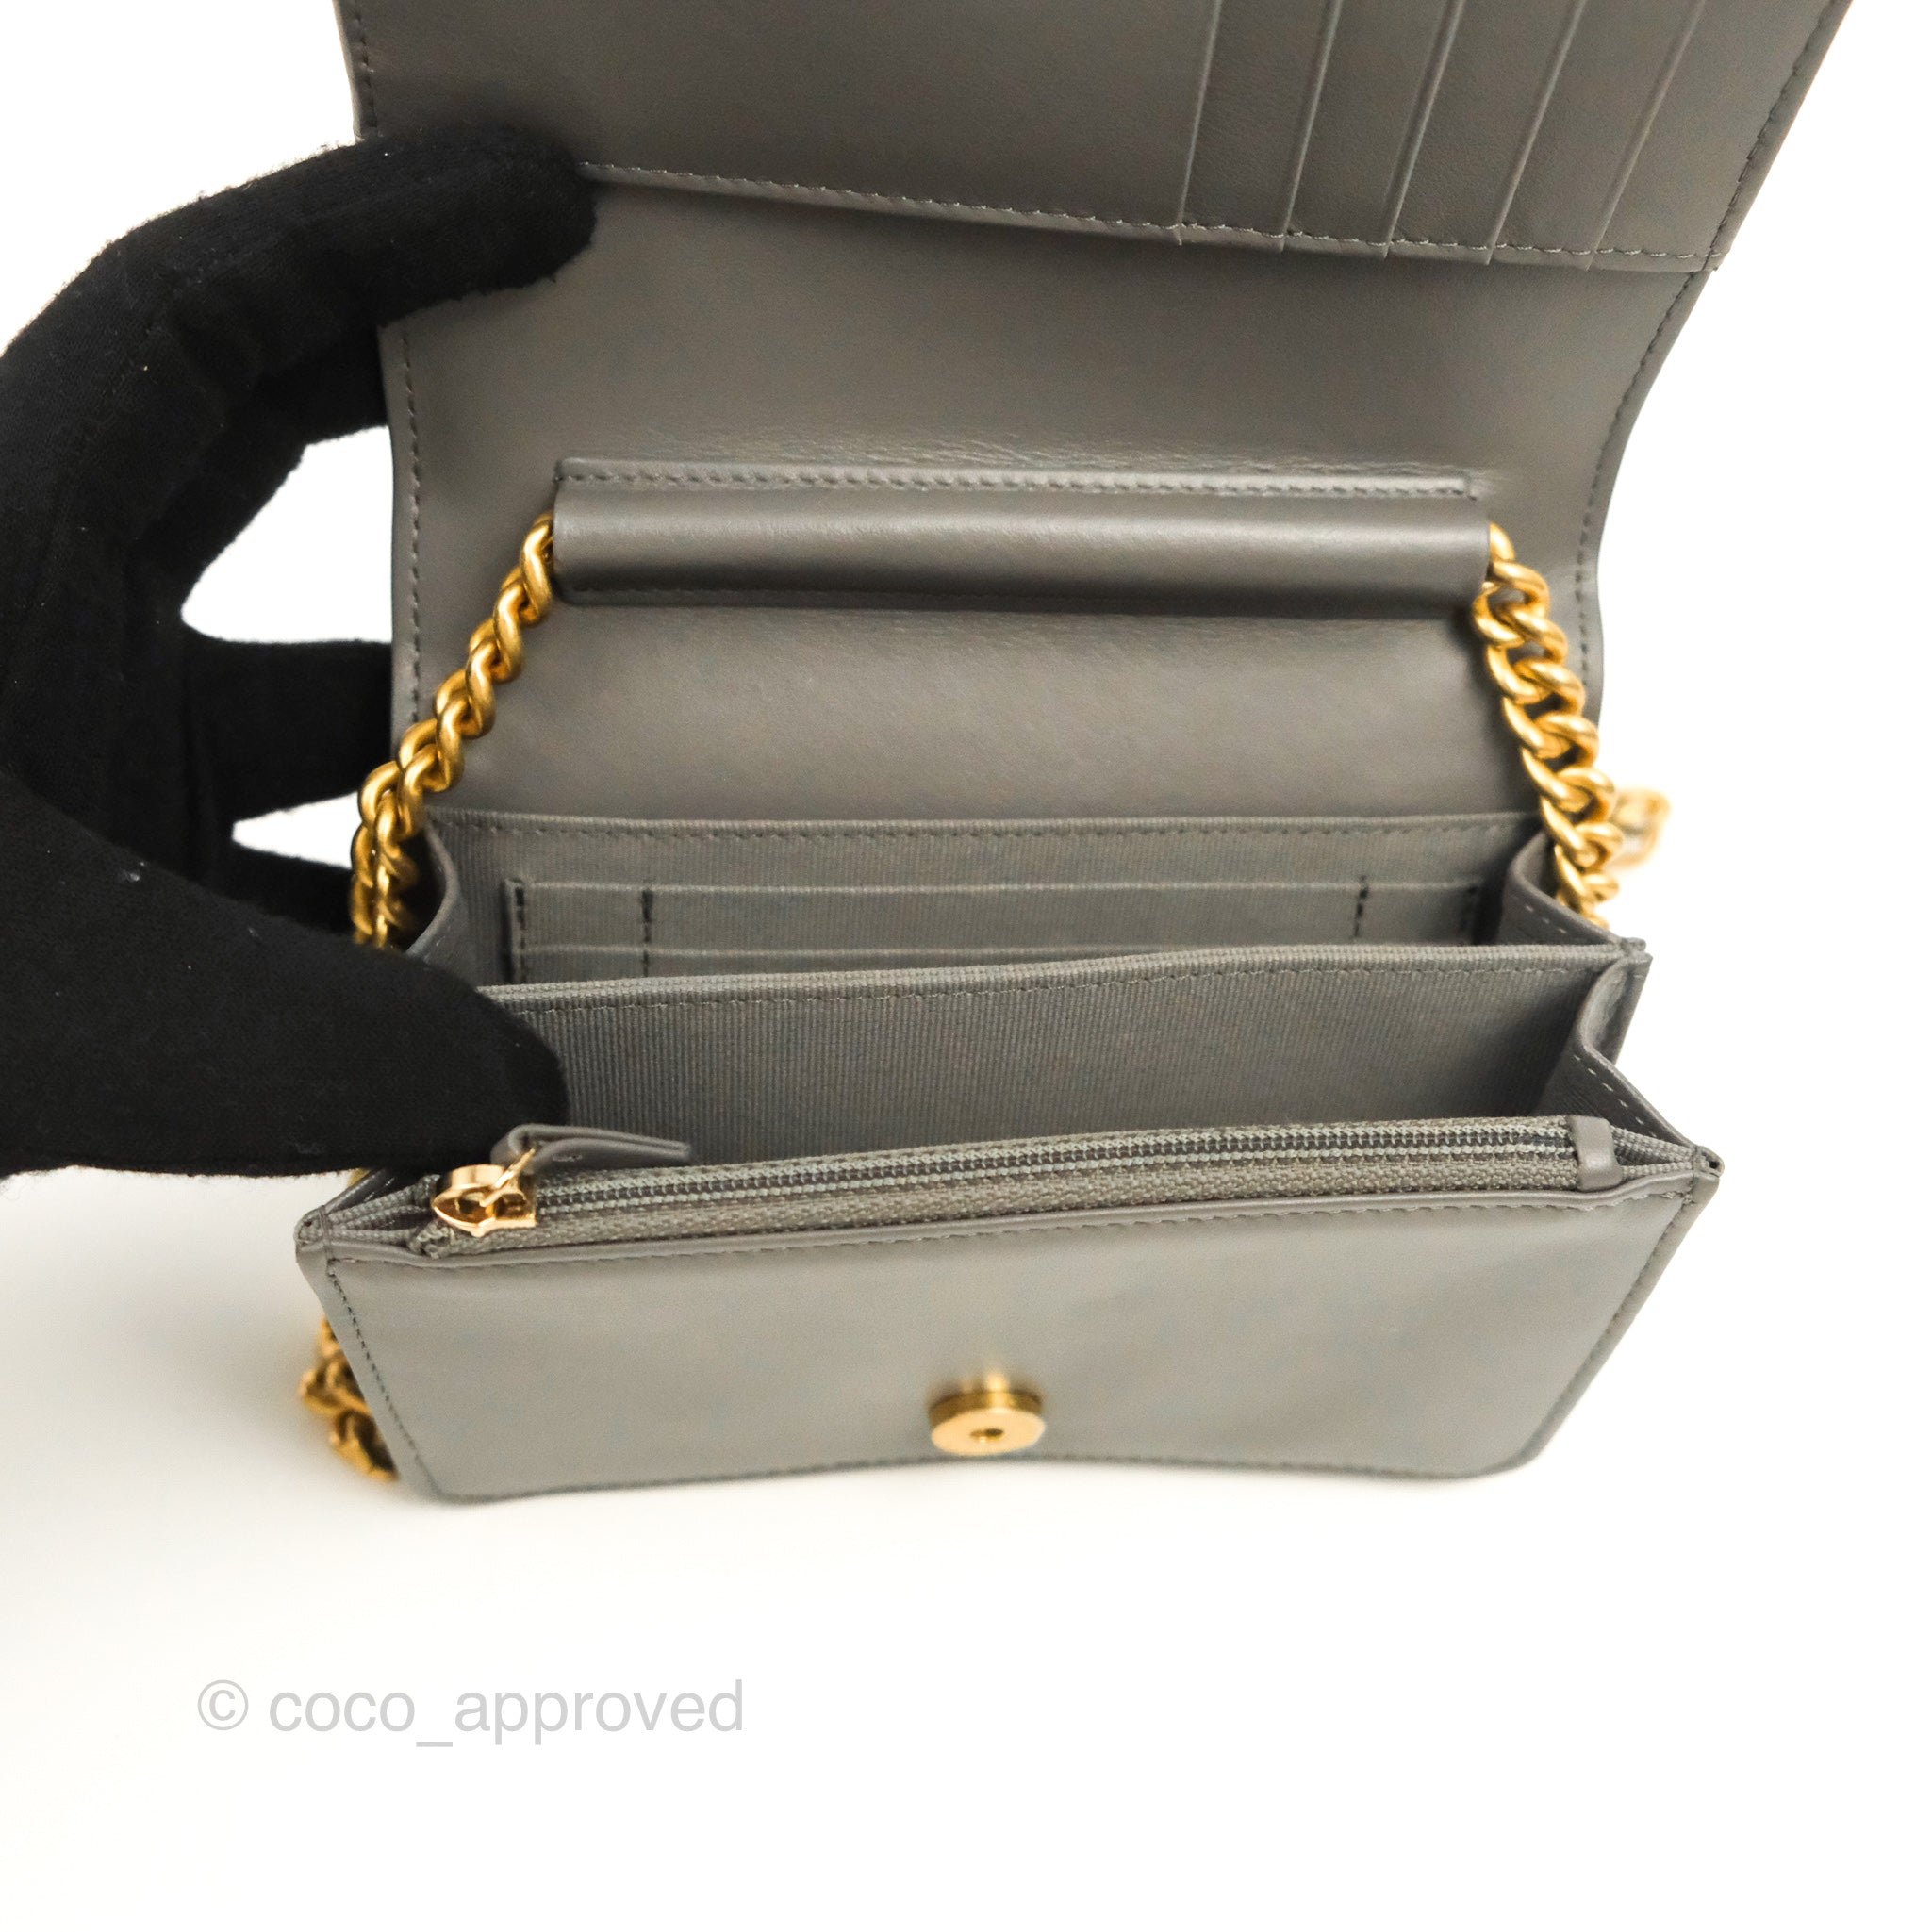 Boy Wallet on Chain WOC Caviar Quilted Black GHW